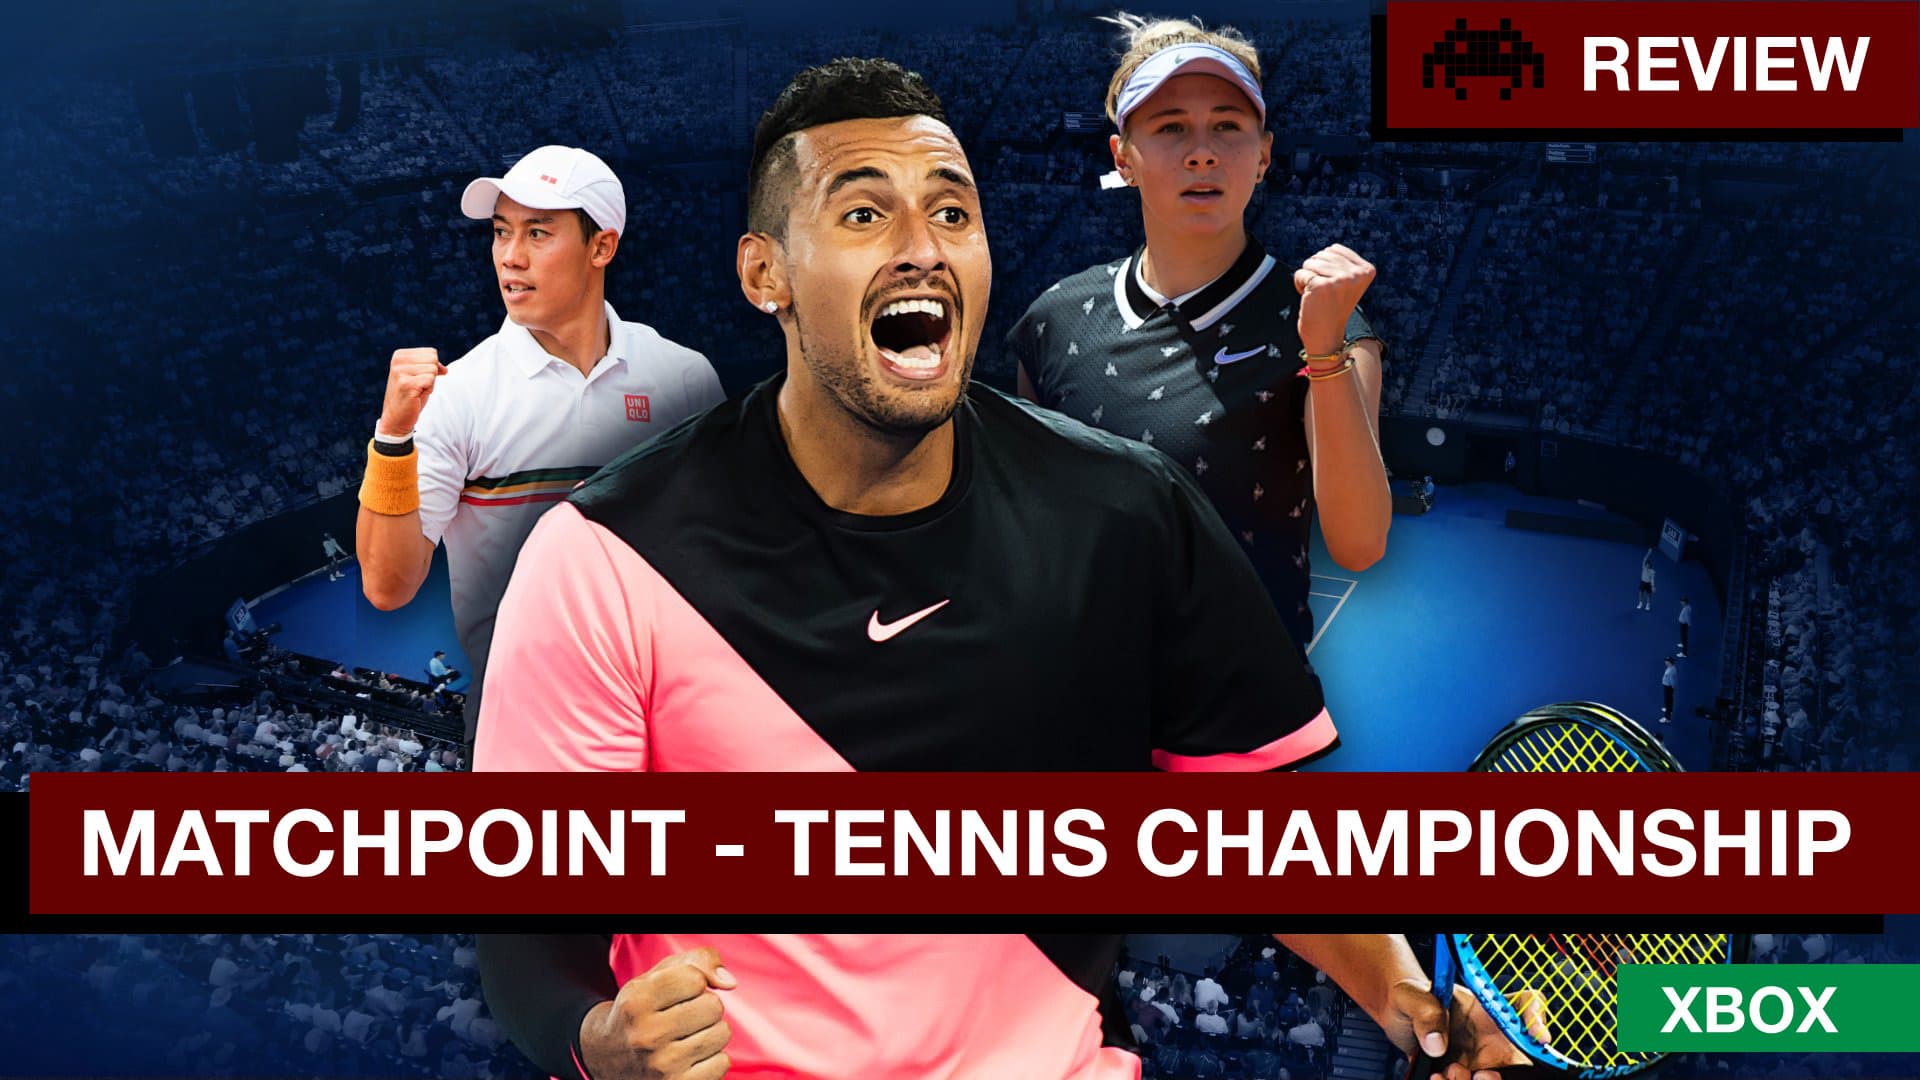 matchpoint-tennis-championship-review